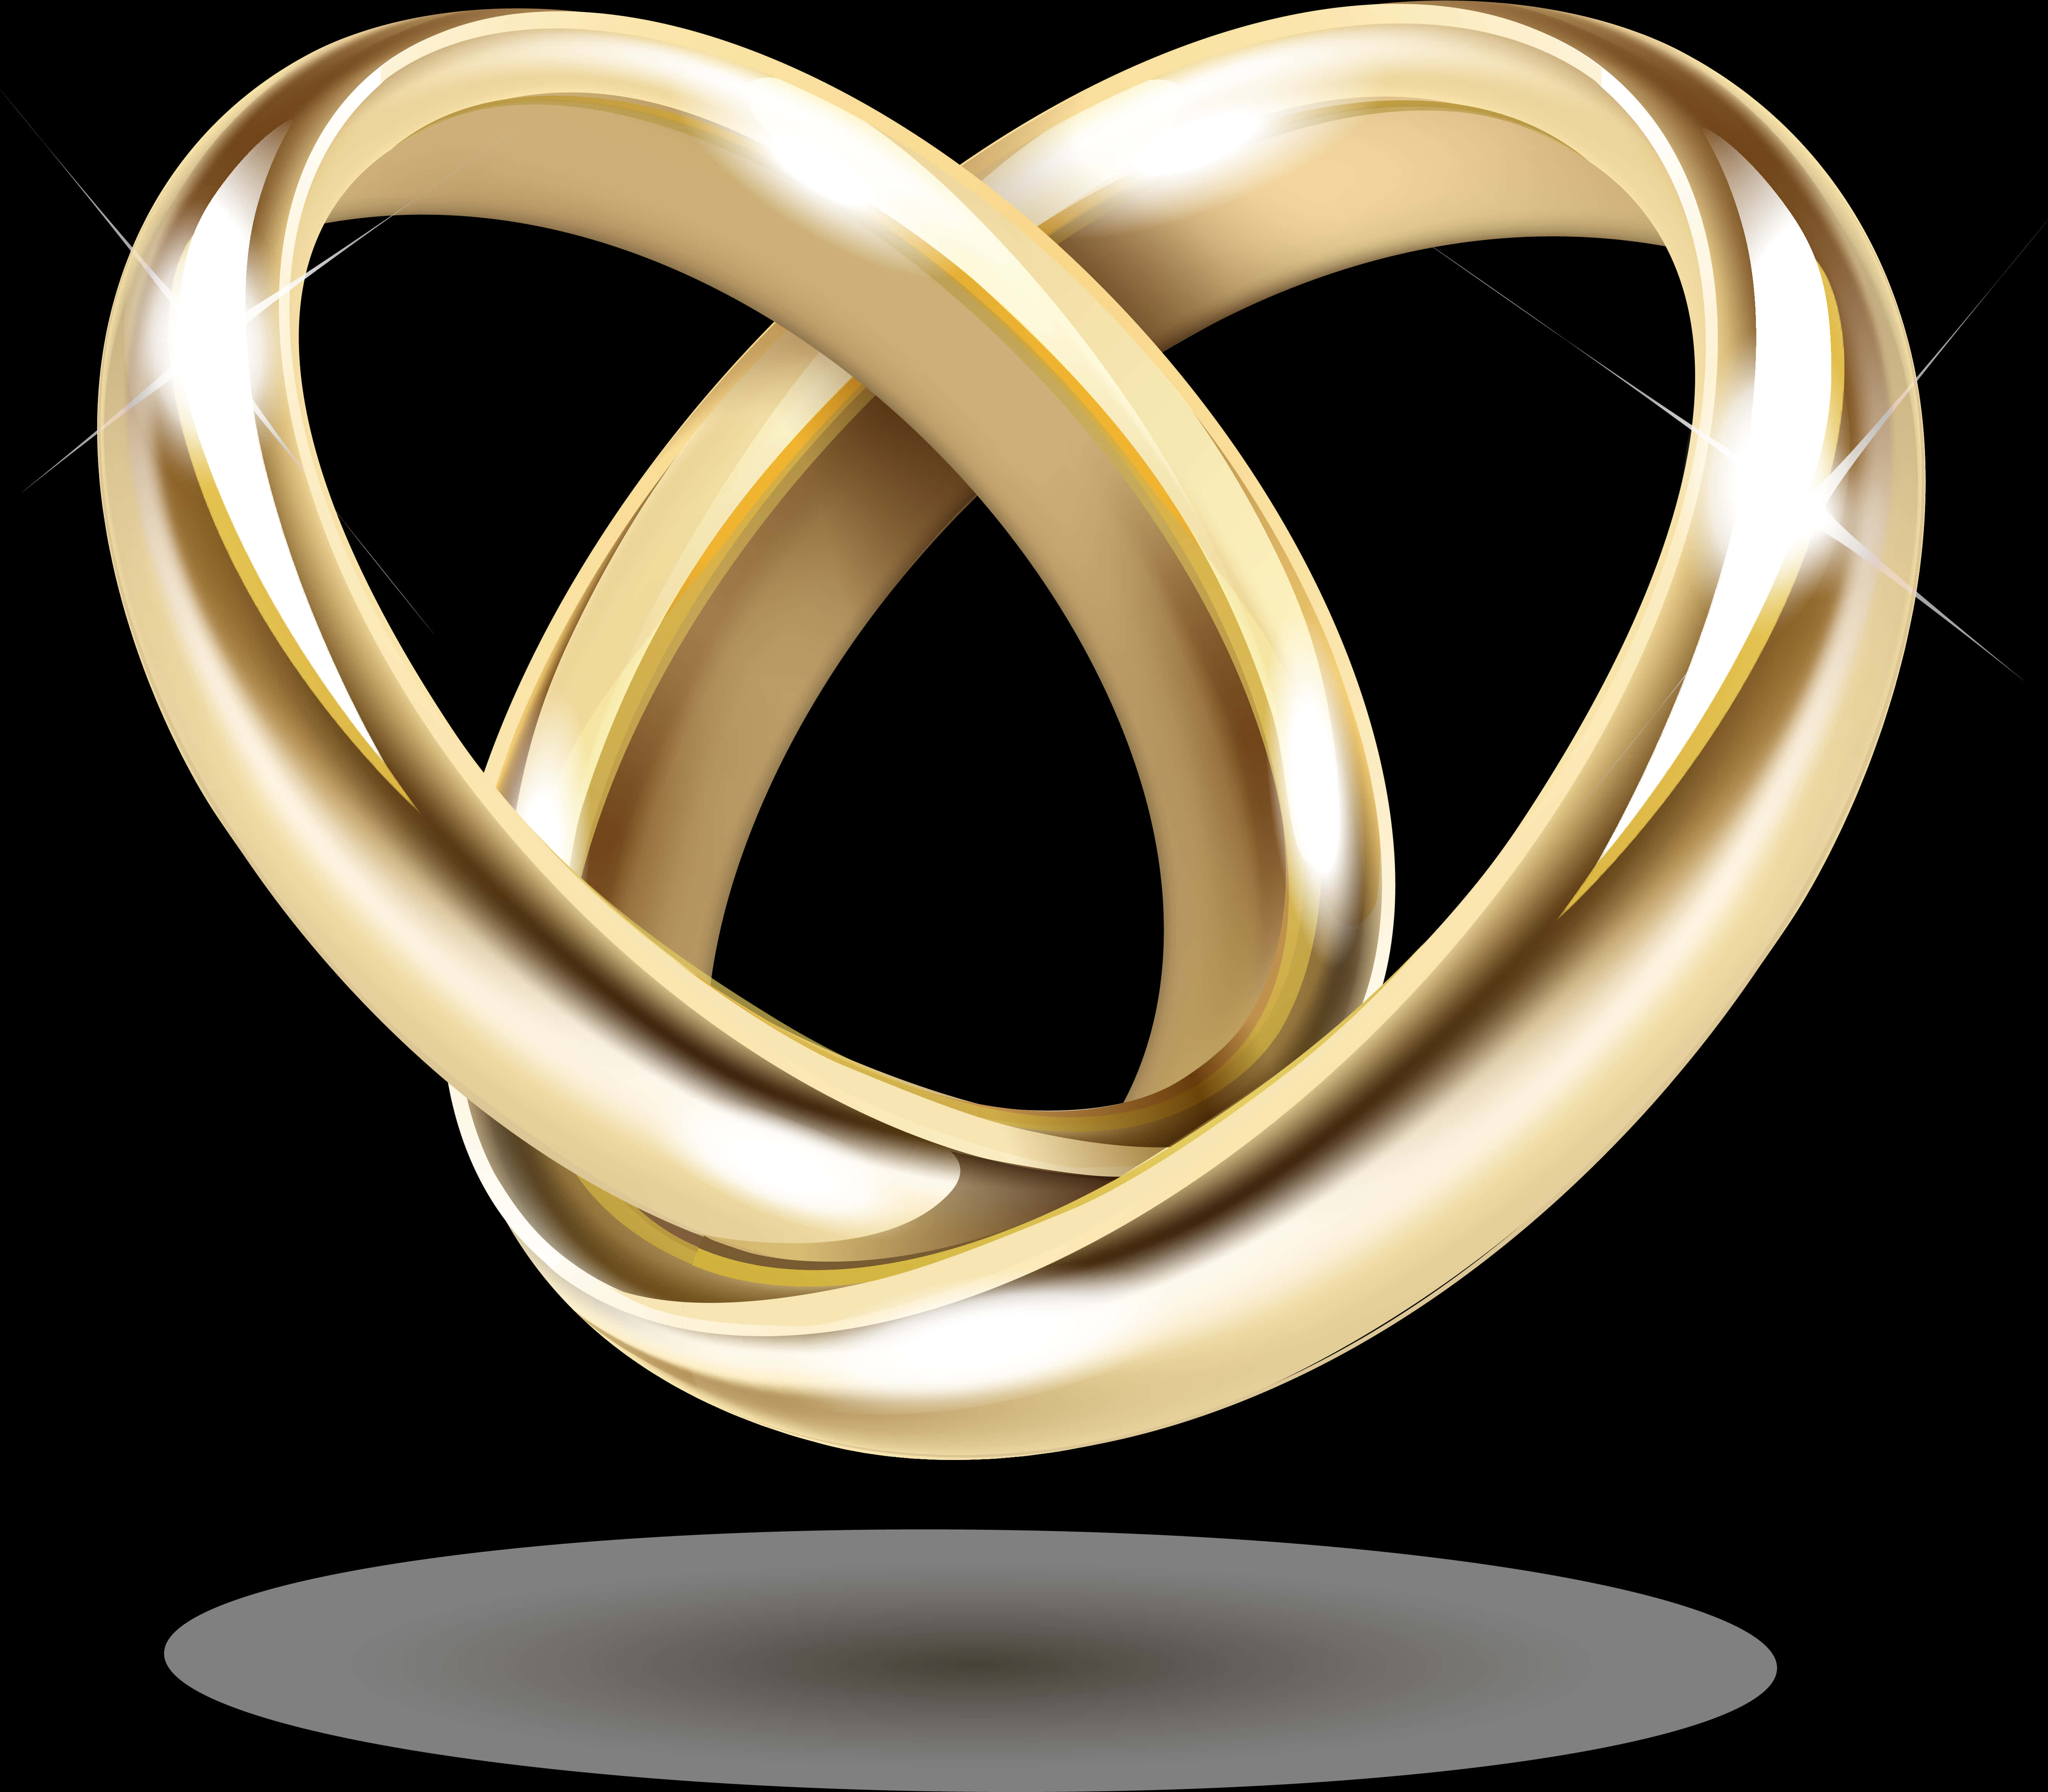 A Gold Ring In The Shape Of A Heart